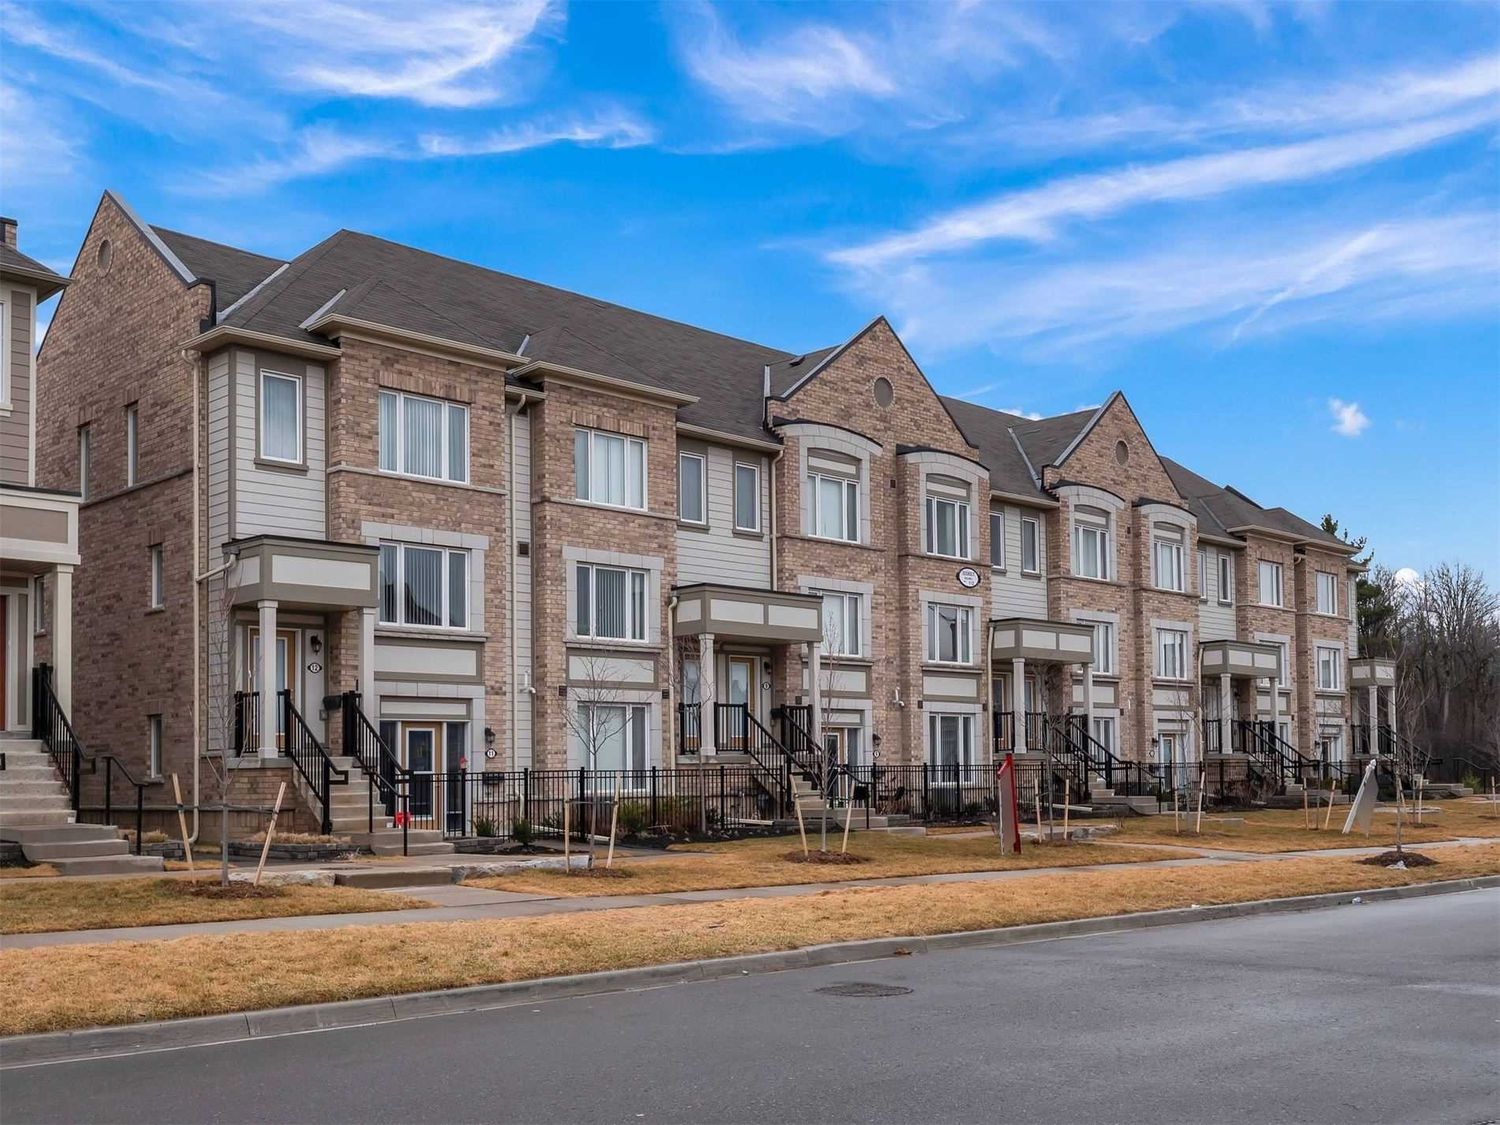 1 Beckenrose Court. Beckenrose Court Townhomes is located in  Brampton, Toronto - image #1 of 2